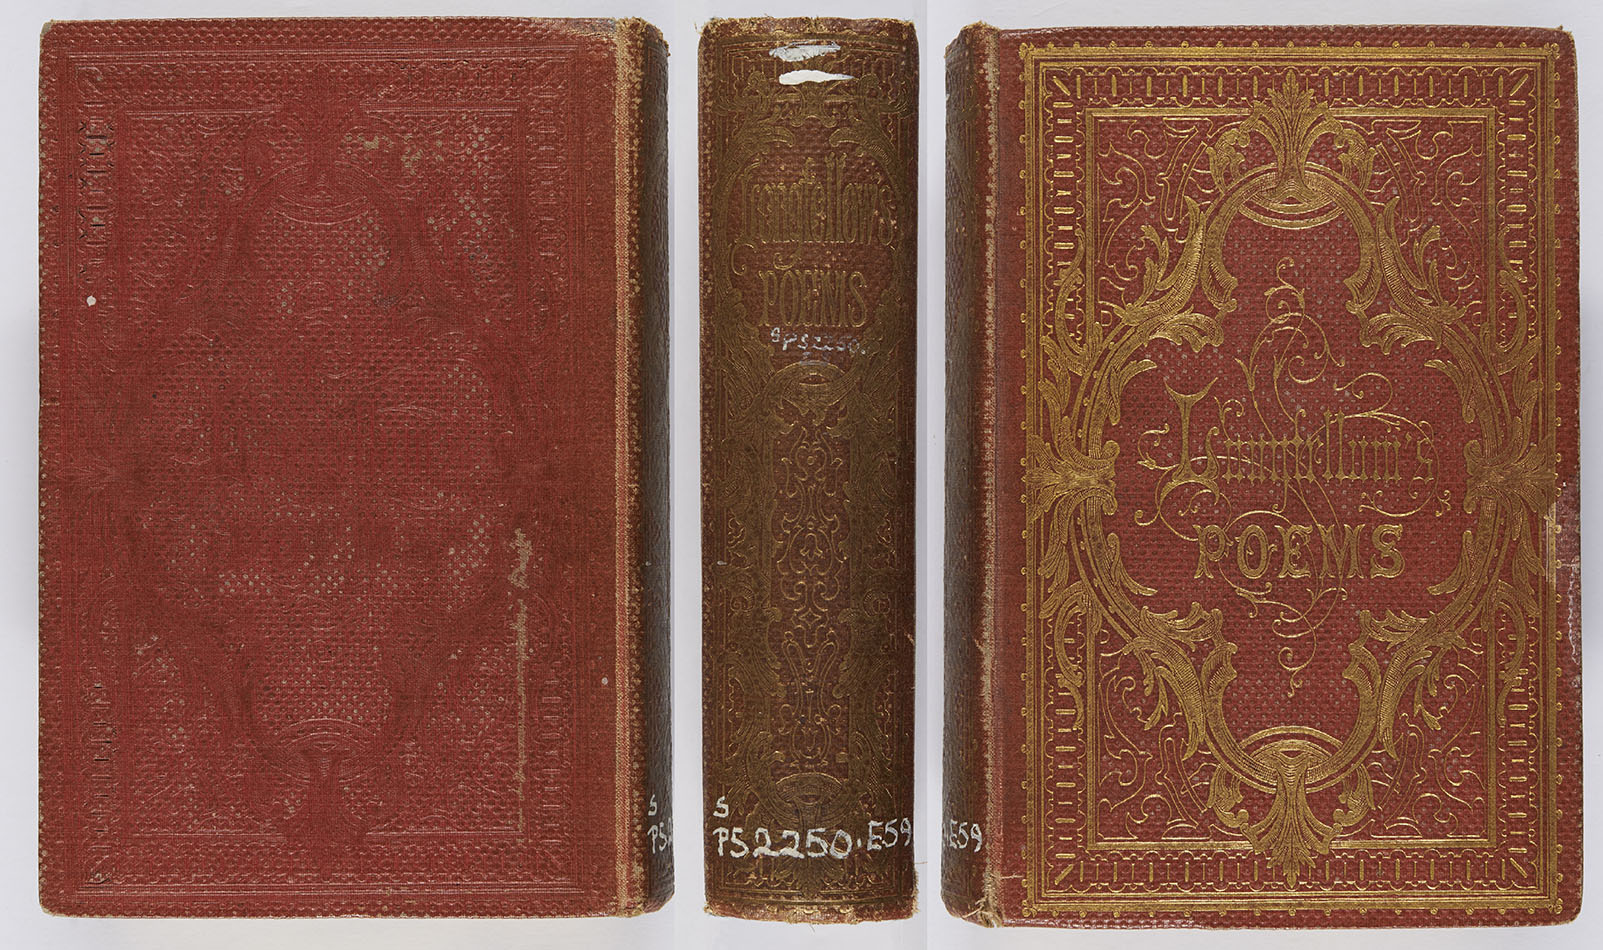 The front cover and spine of this binding are extensively blocked in gilt, but the back cover is only blocked in blind. Henry Wadsworth Longfellow, Poems (Edinburgh: William P. Nimmo, 1859), McI PS2250.E59.